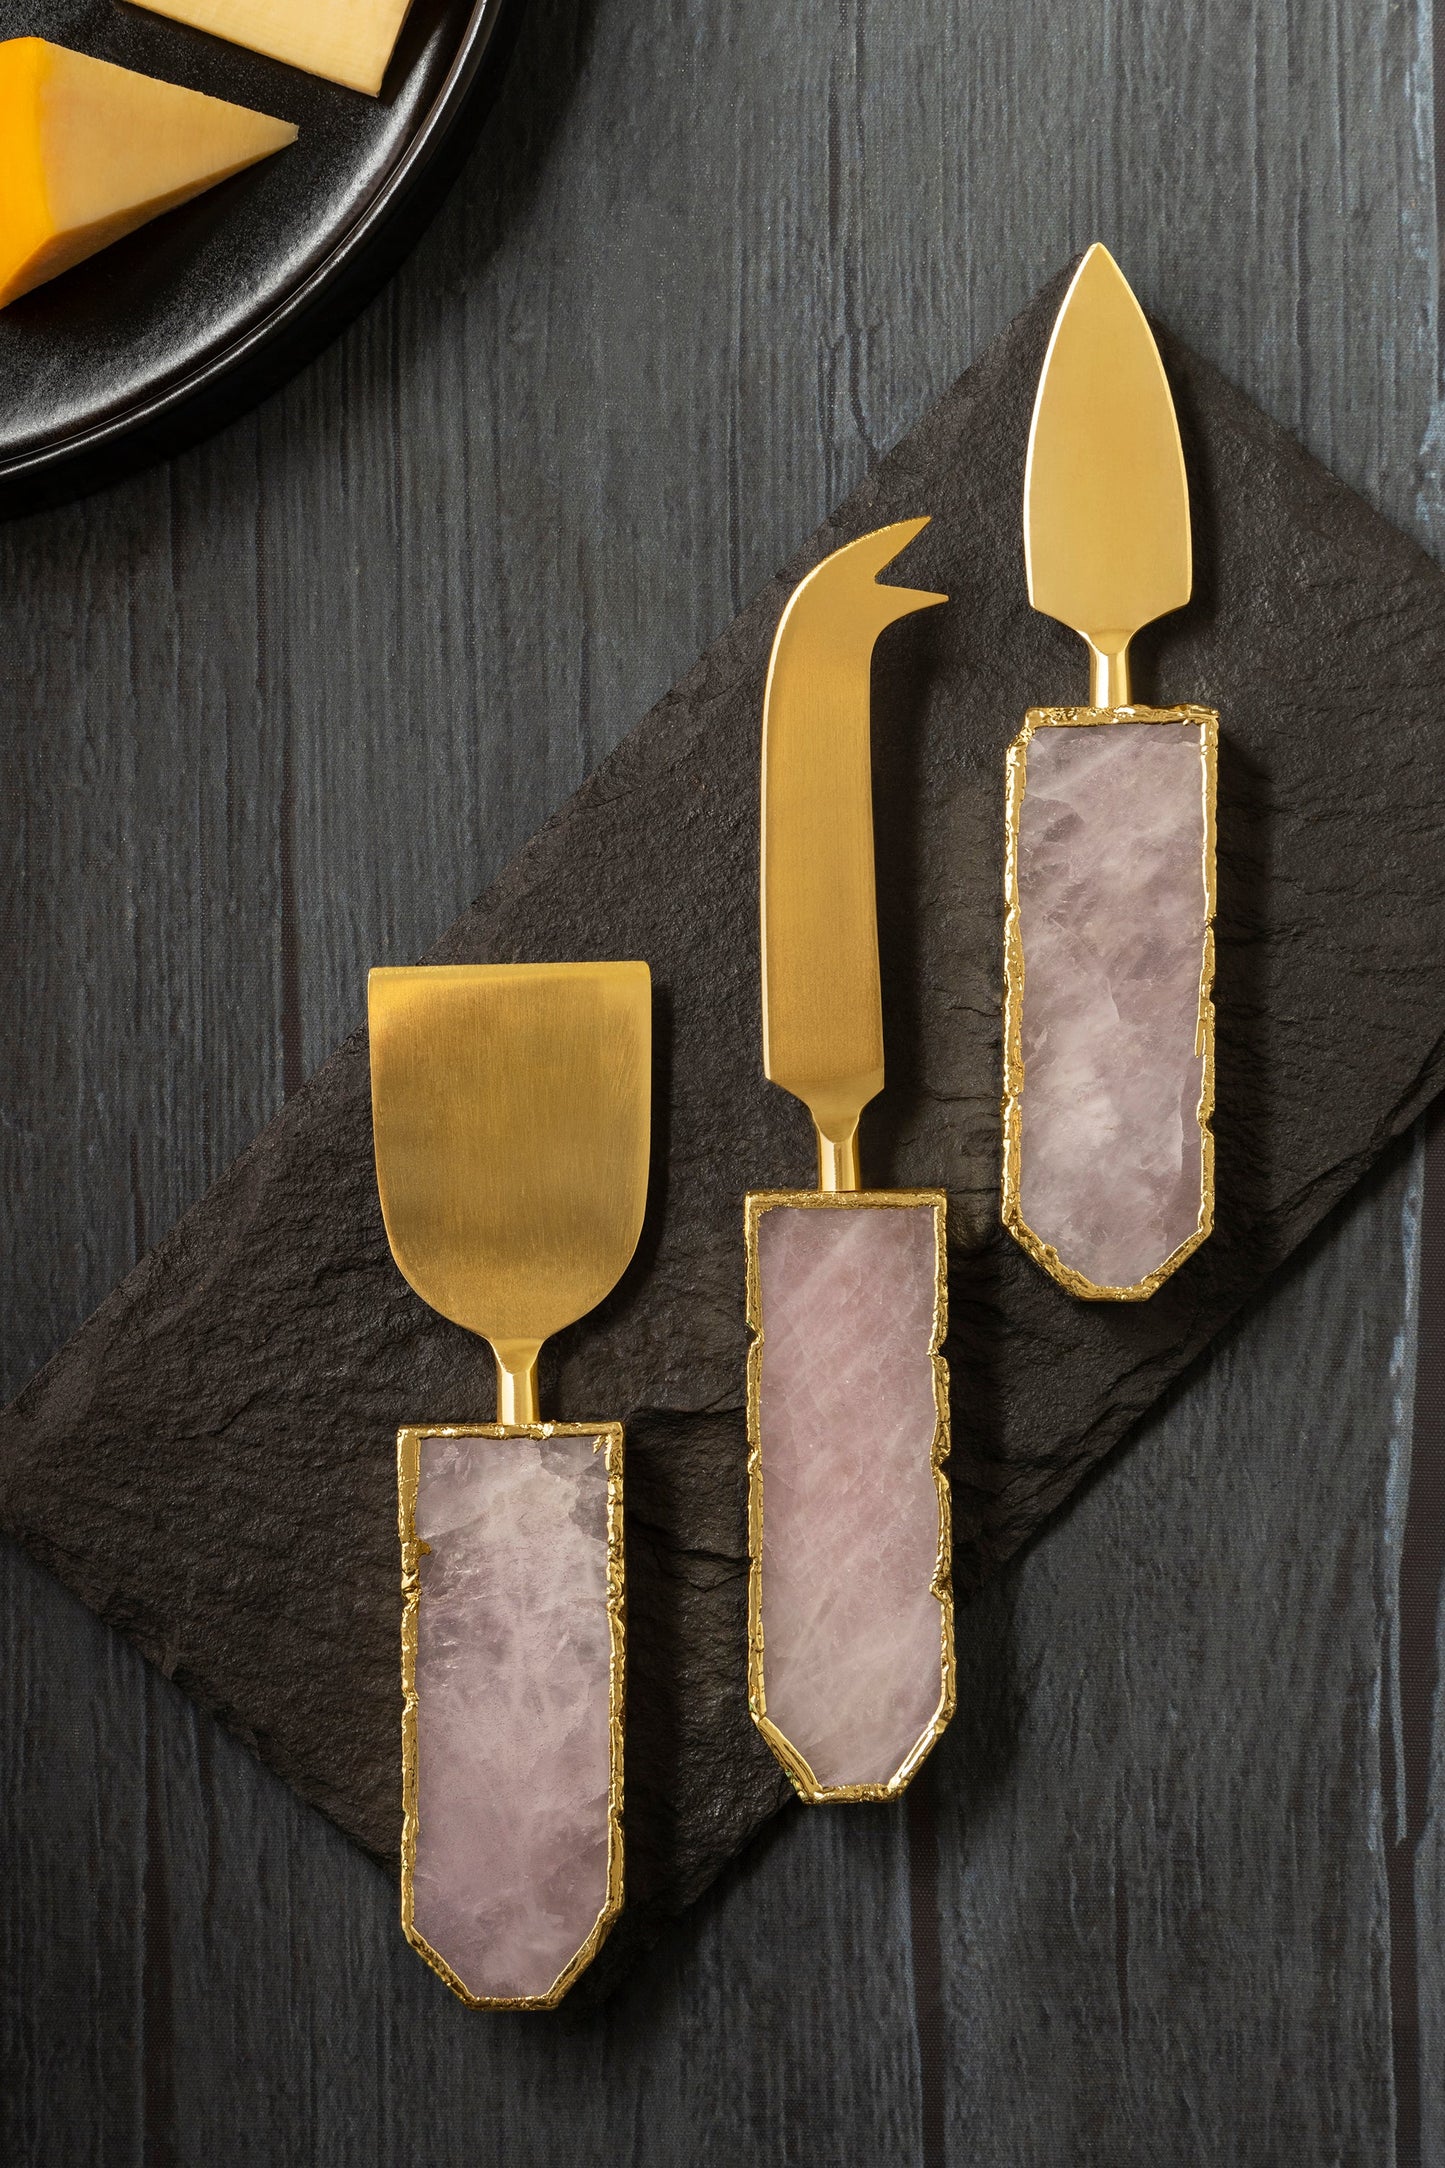 Rose Quartz Cheese Knives, Set of 3 (Pale Pink & Gold)